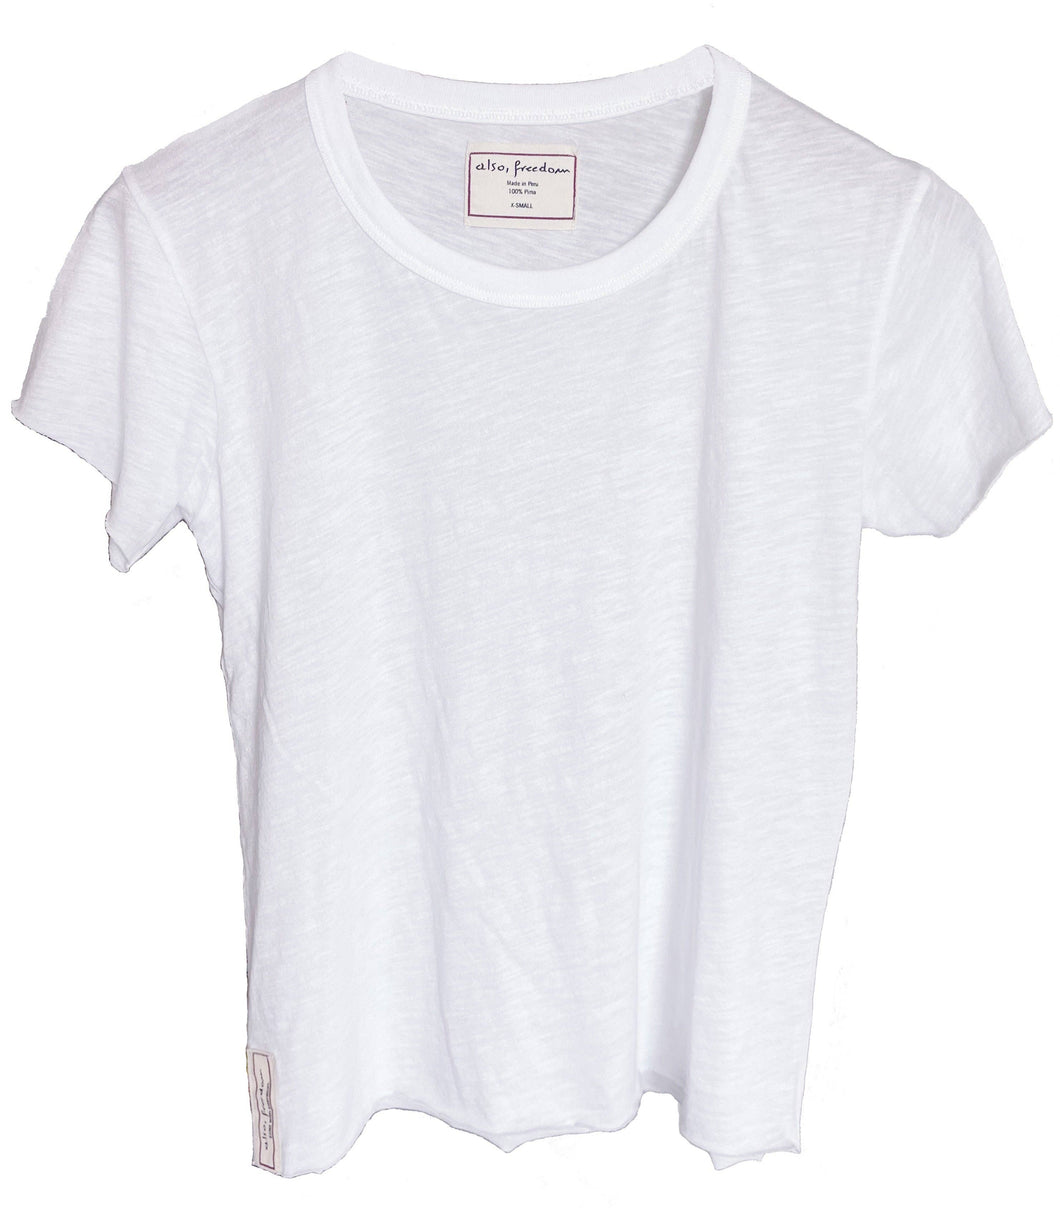 White Air Tee by Also, Freedom - Crew Neck